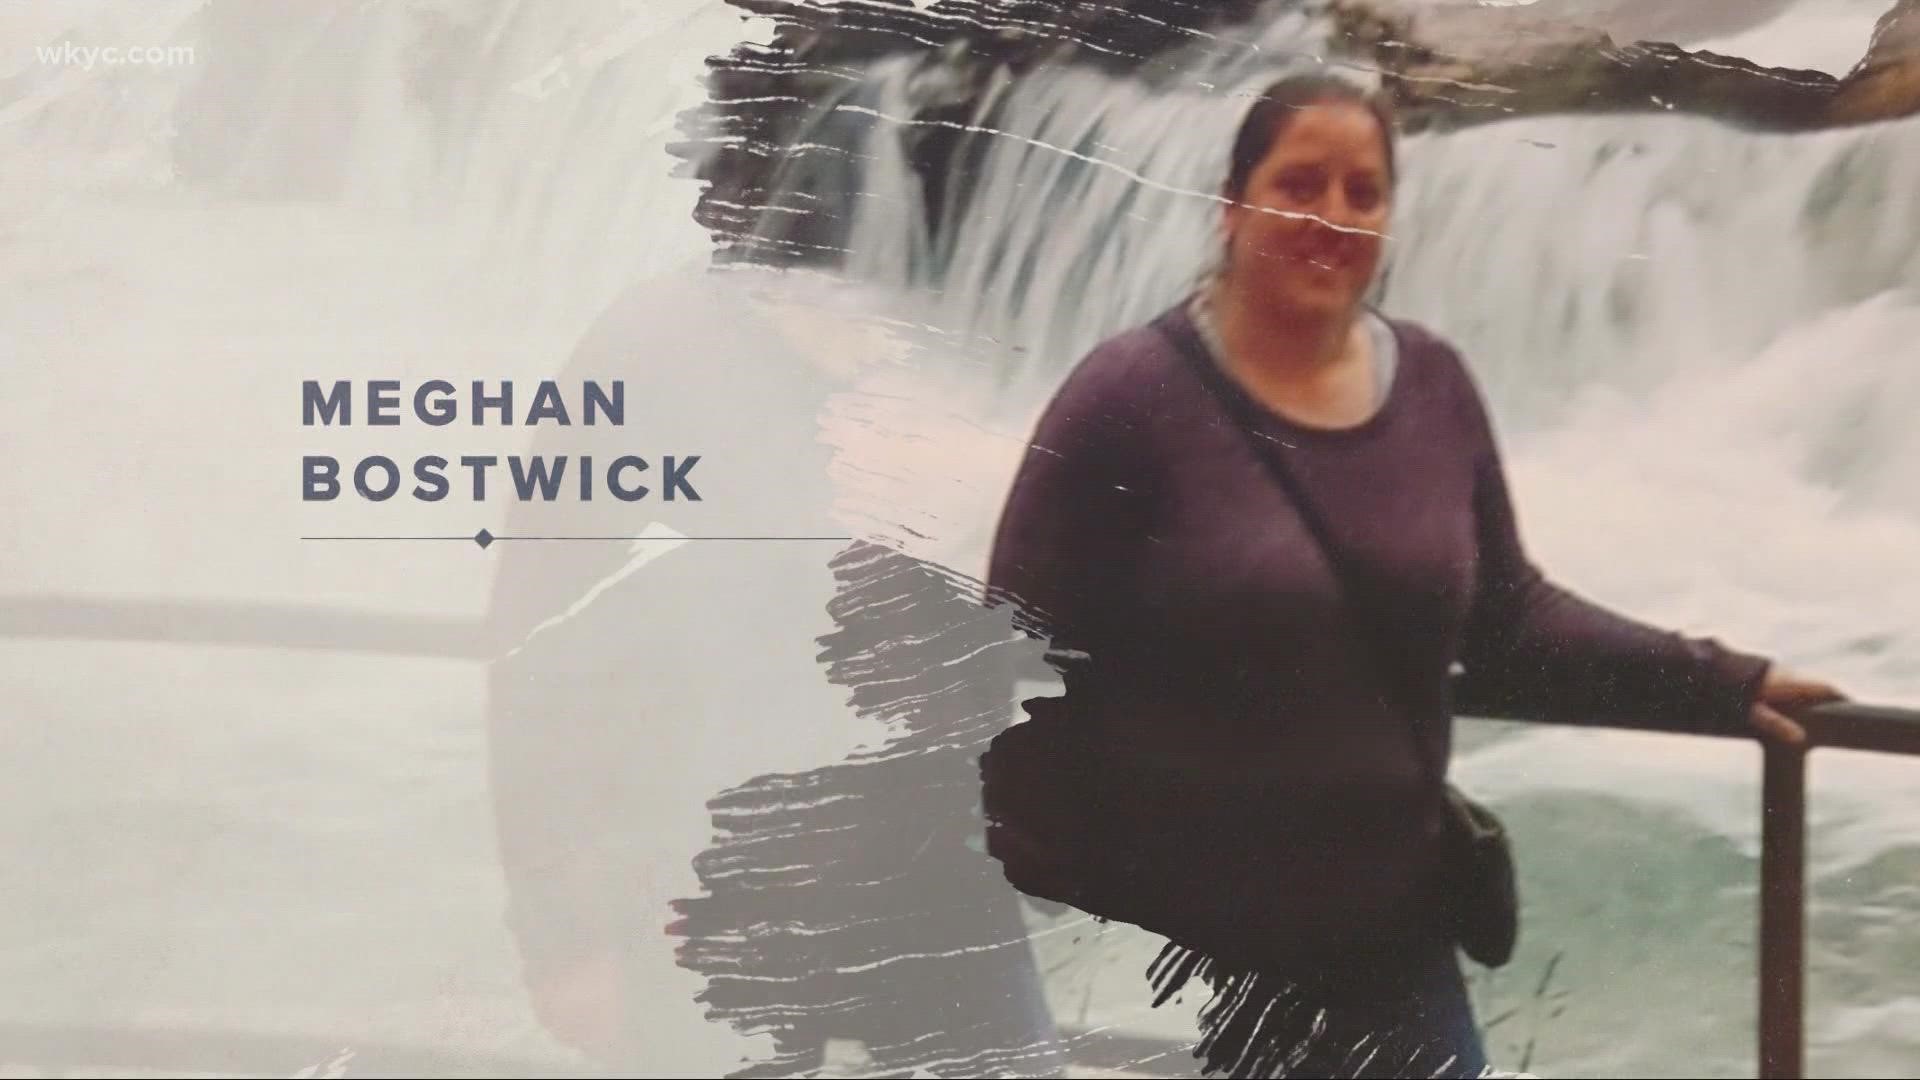 Meghan Bostwick has been a giver her whole life. But now, it's time to give back to her.